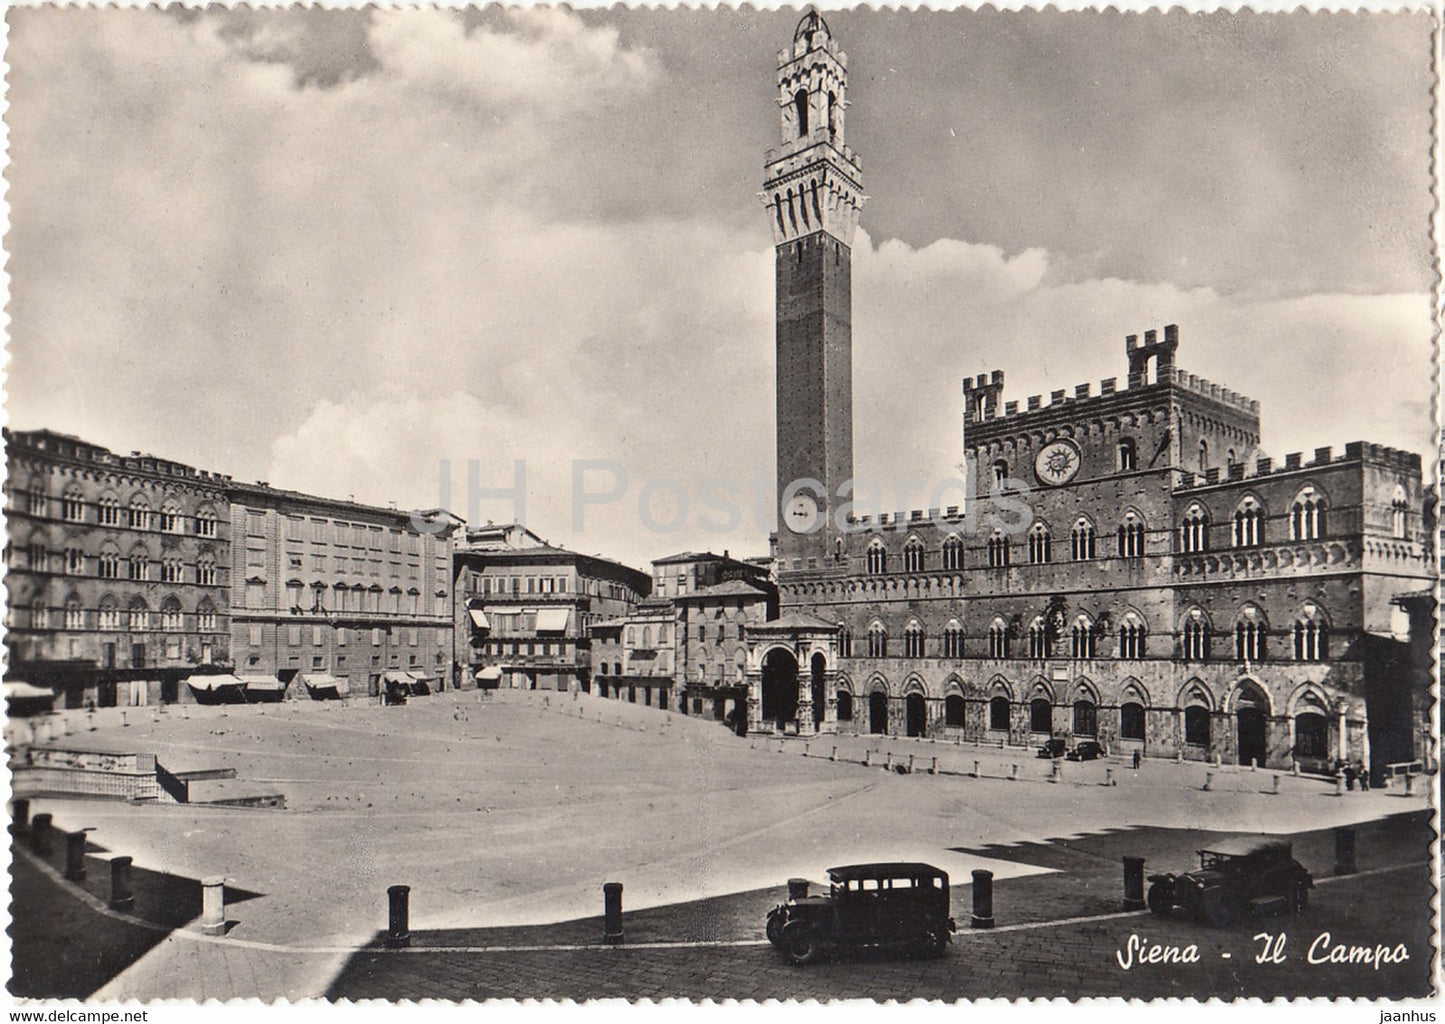 Siena - Il Campo - old car - old postcard - 1958 - Italy - used - JH Postcards